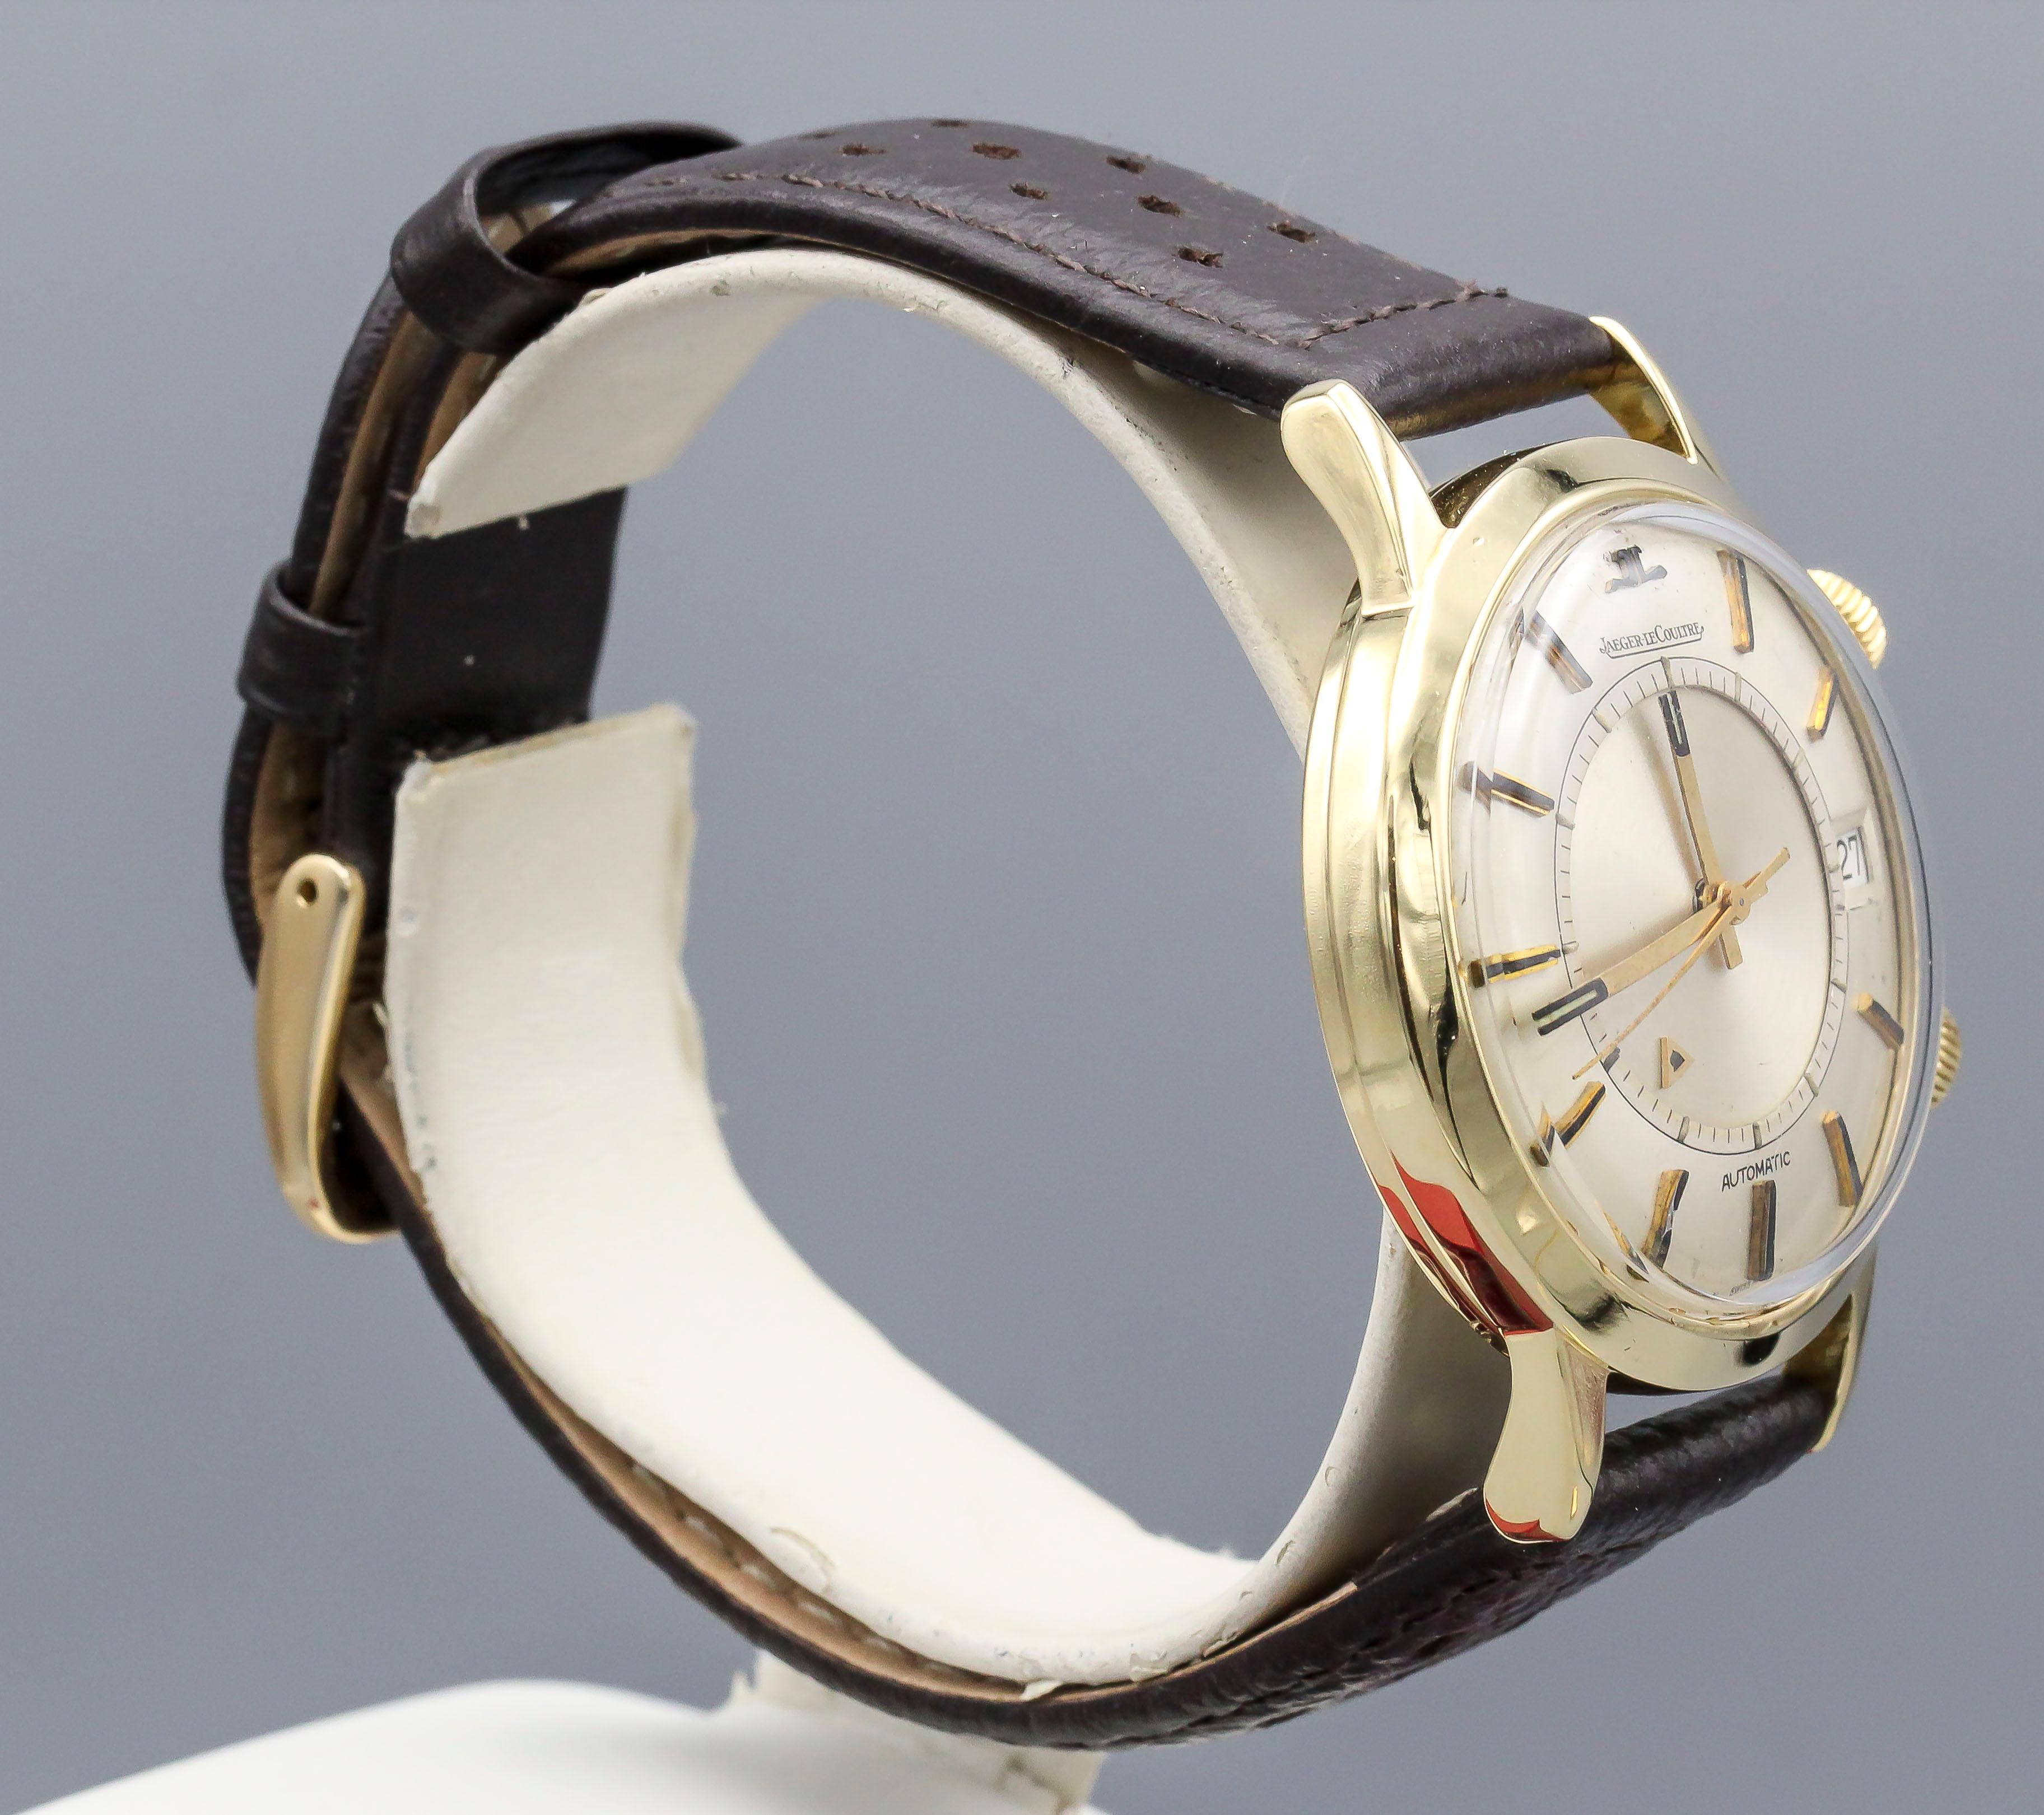 Fine 18K yellow gold Jaeger LeCoultre Memovox wristwatch. It features an automatic movement and an alarm function. It is more rare than the gold filled counterparts, because of the enamel hour markers, it's a solid 18K gold case, it features a date